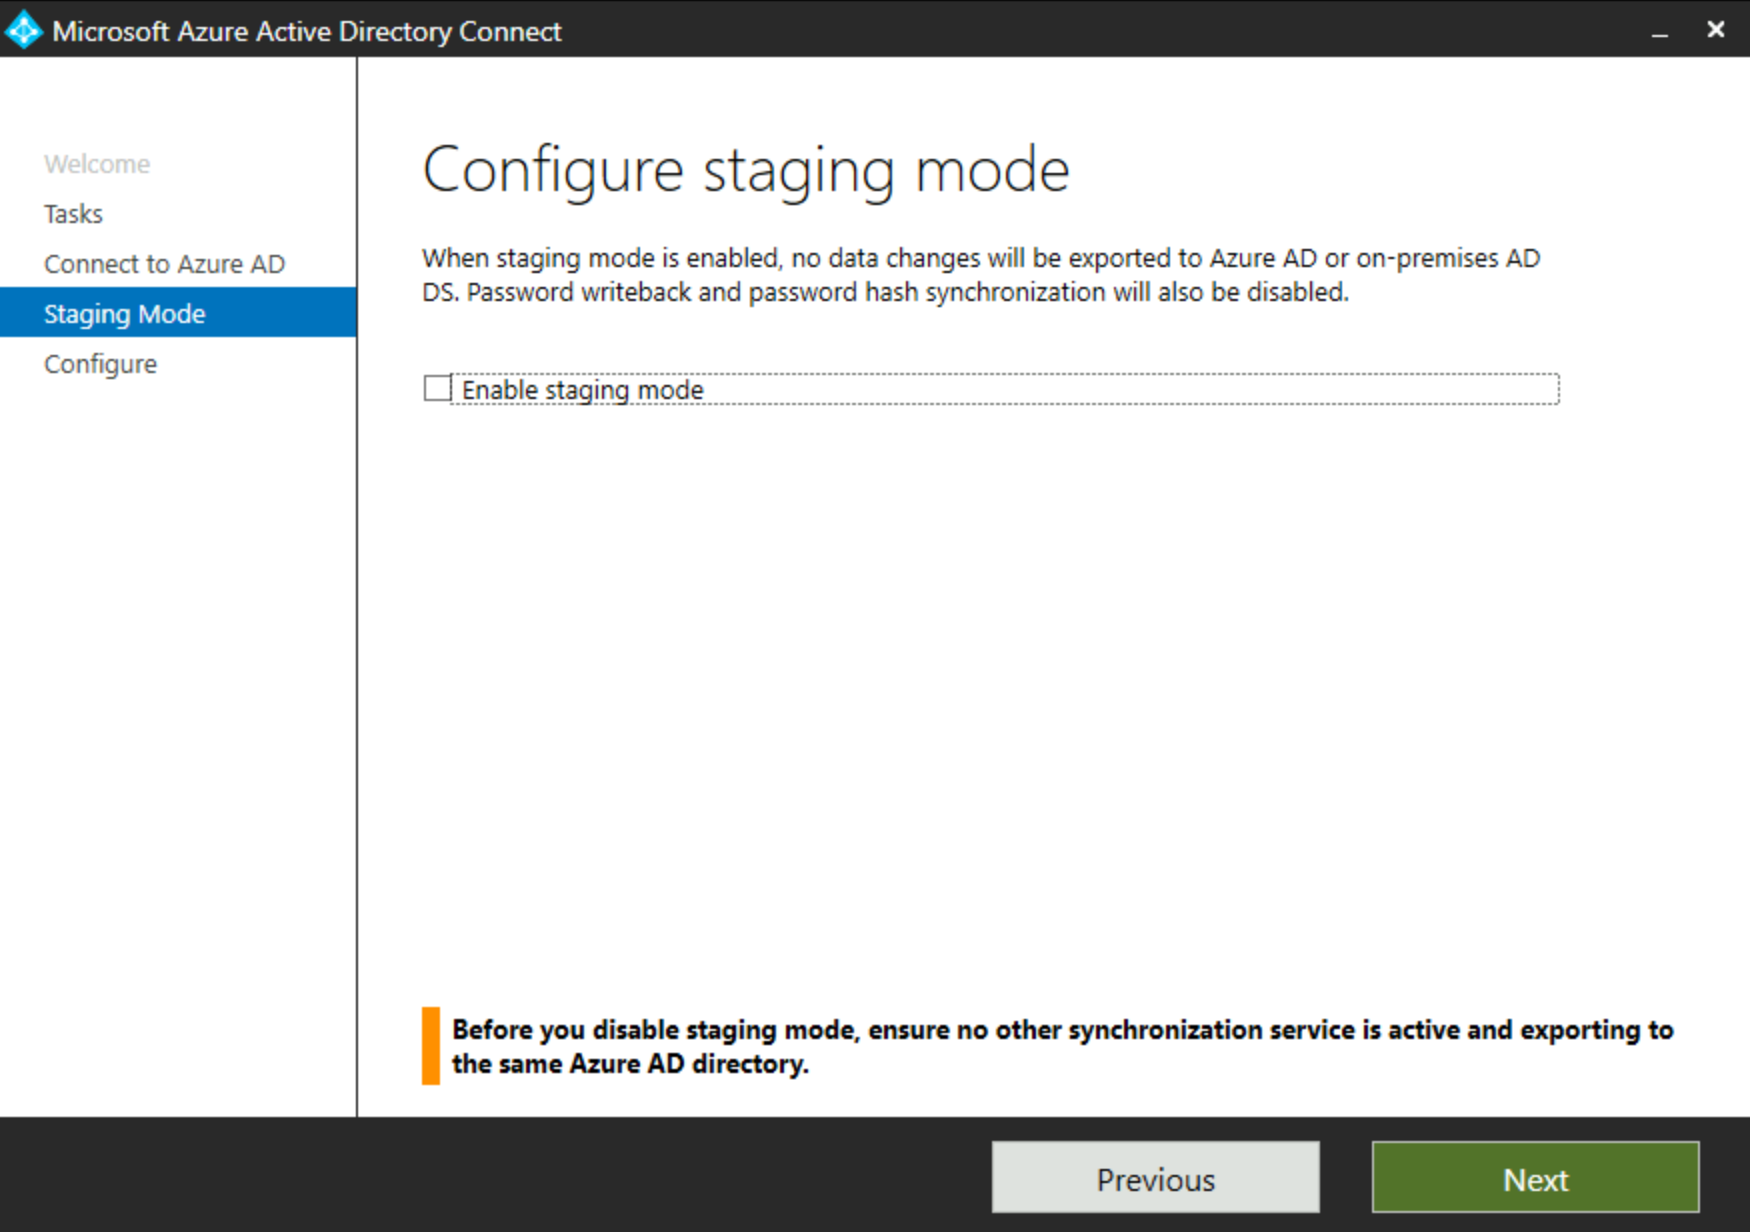 Screenshot shows Staging Mode configuration in the Staging Microsoft Entra Connect dialog box.